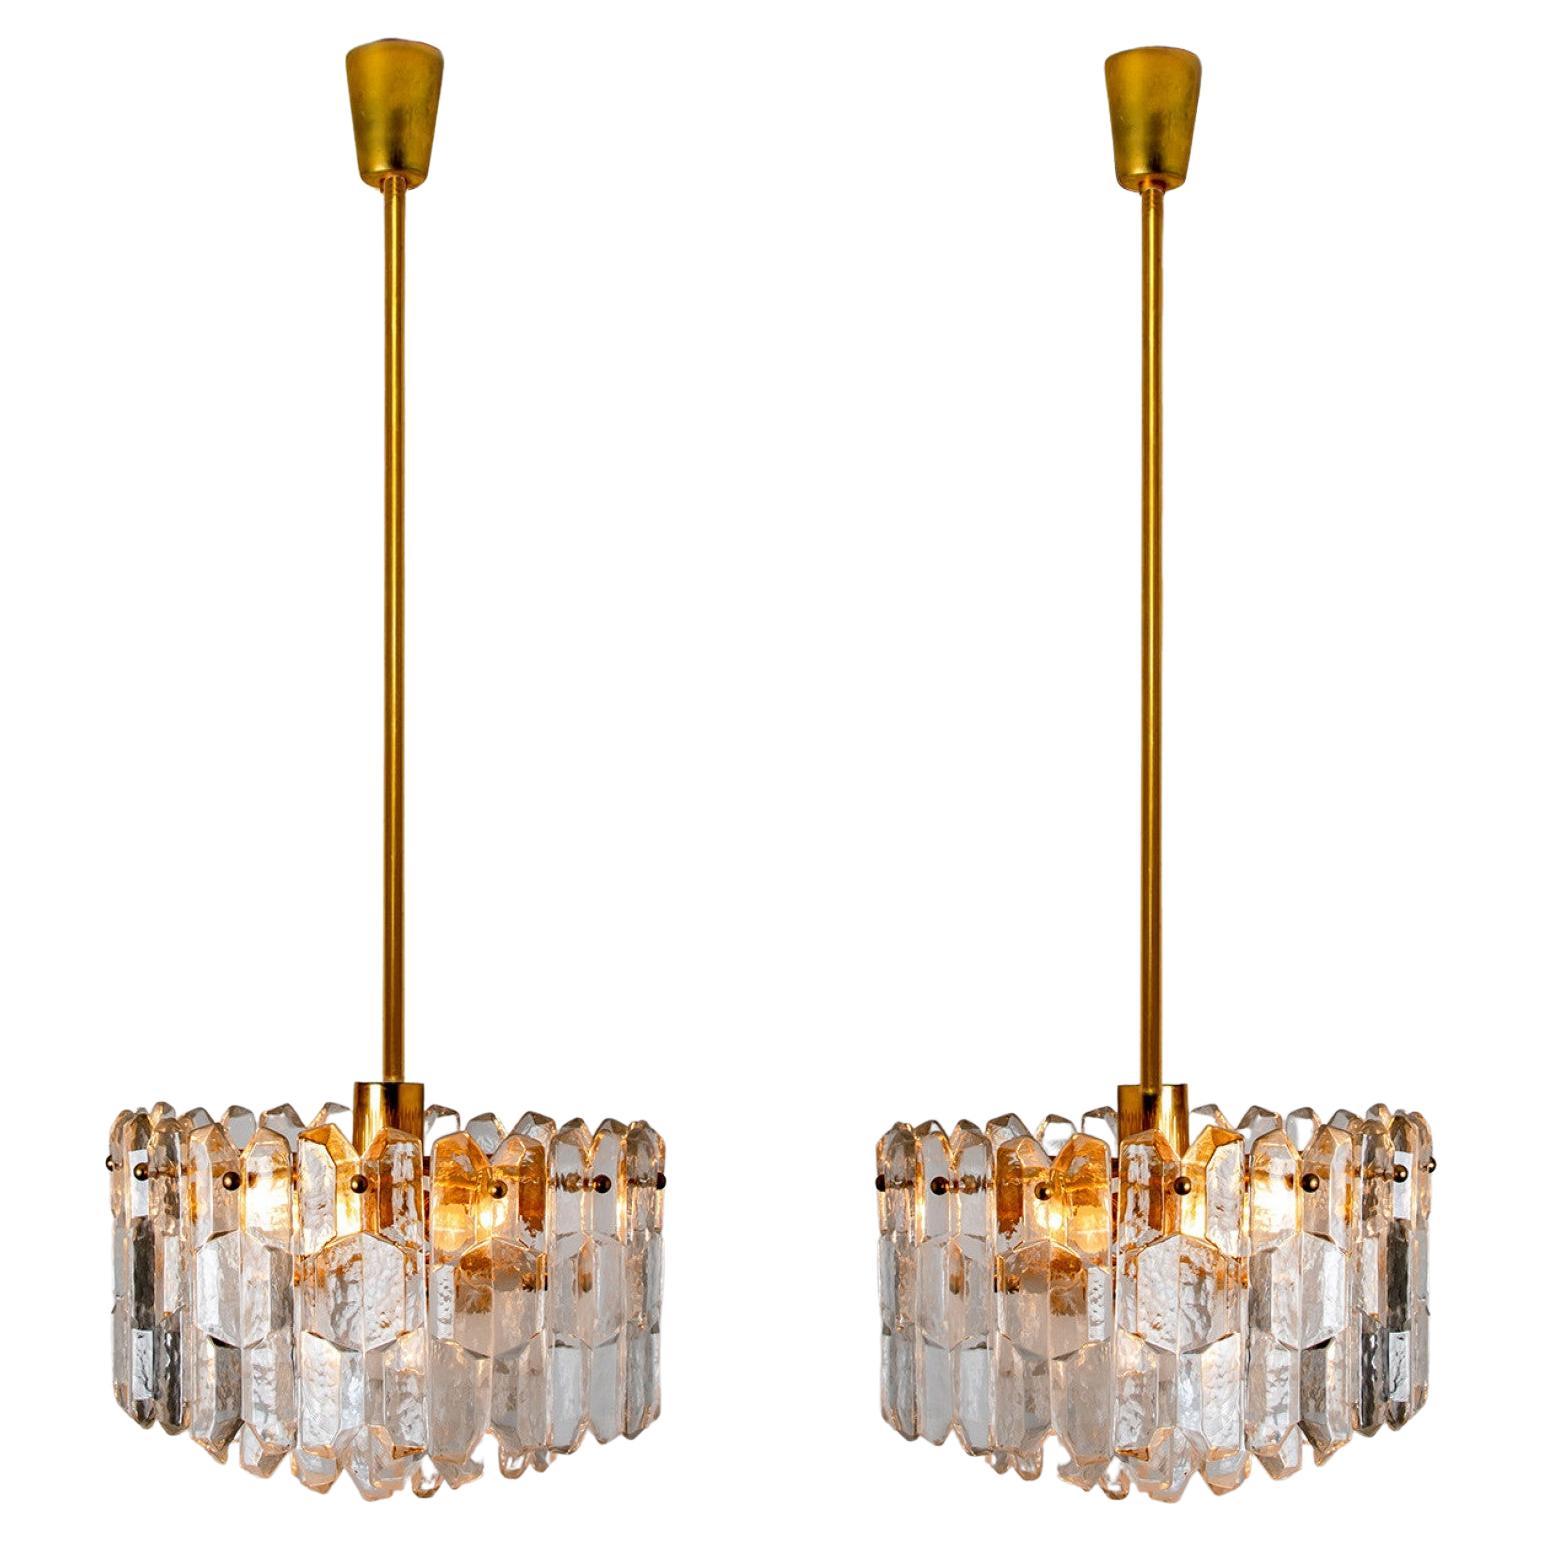 Pair of Kalmar Chandeliers or Pendant Lights 'Palazzo', Gilt Brass and Glass